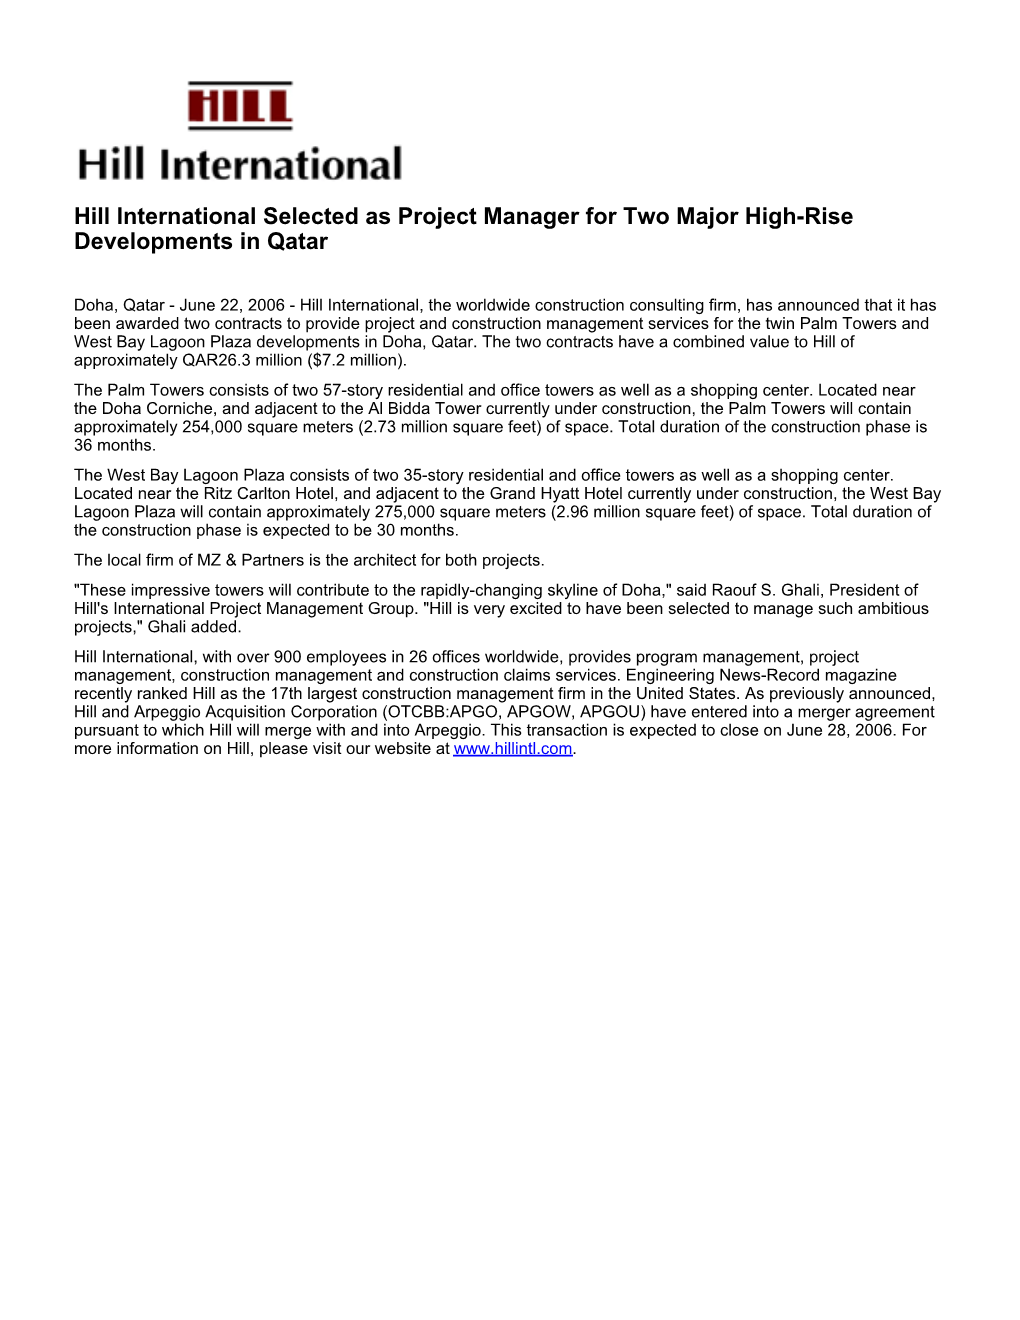 Hill International Selected As Project Manager for Two Major High-Rise Developments in Qatar